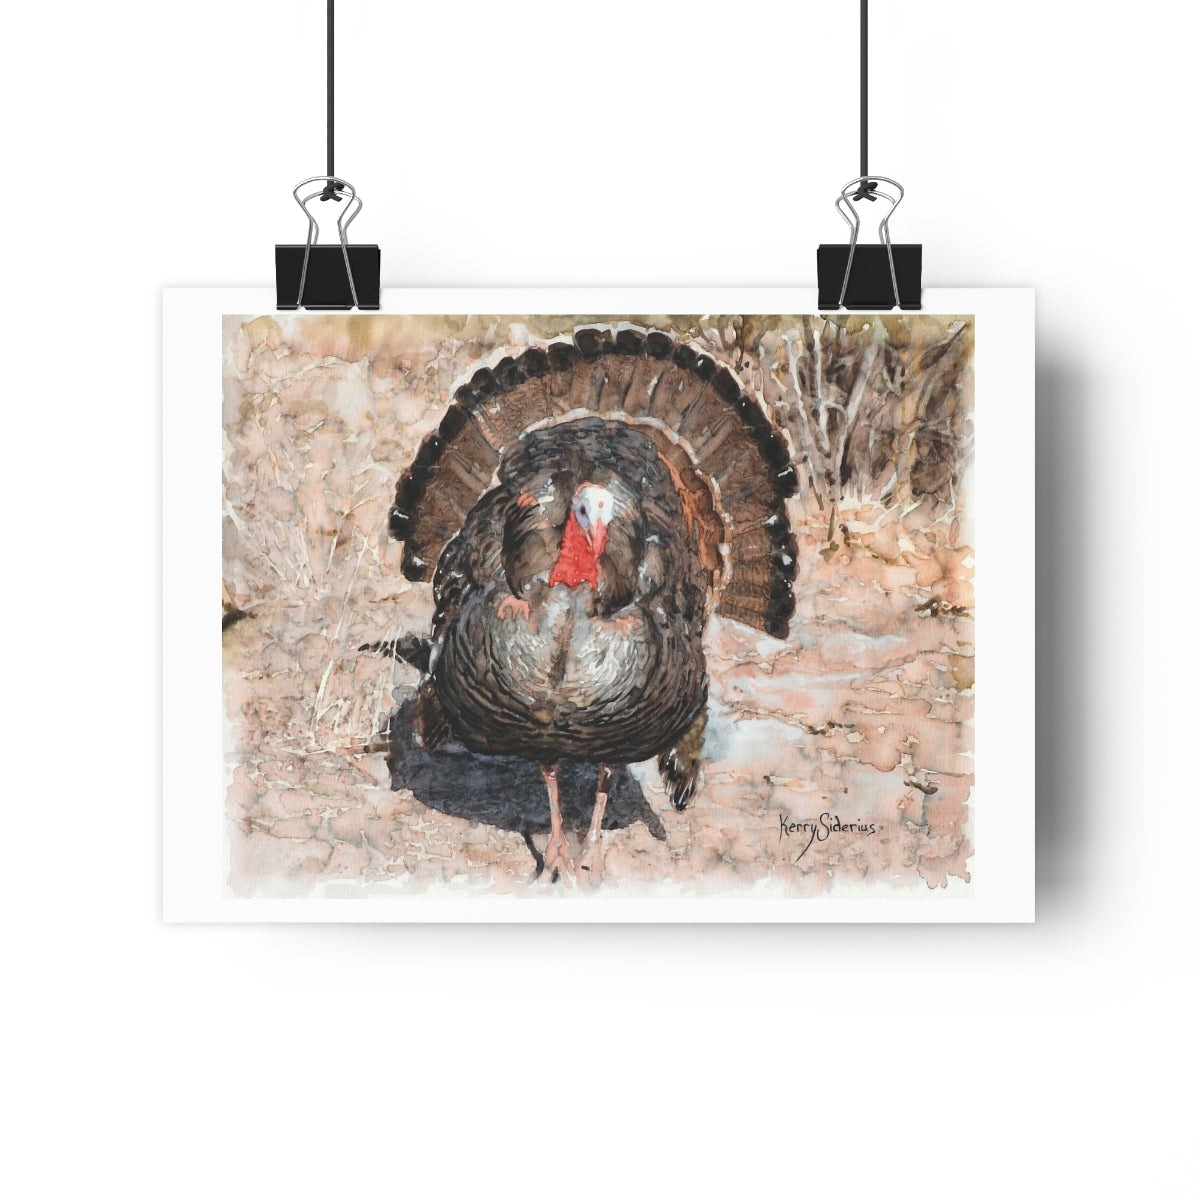 "Wild Turkey Up By Lake Wenatchee" on Archival Poster Print - Kerry Siderius Art 